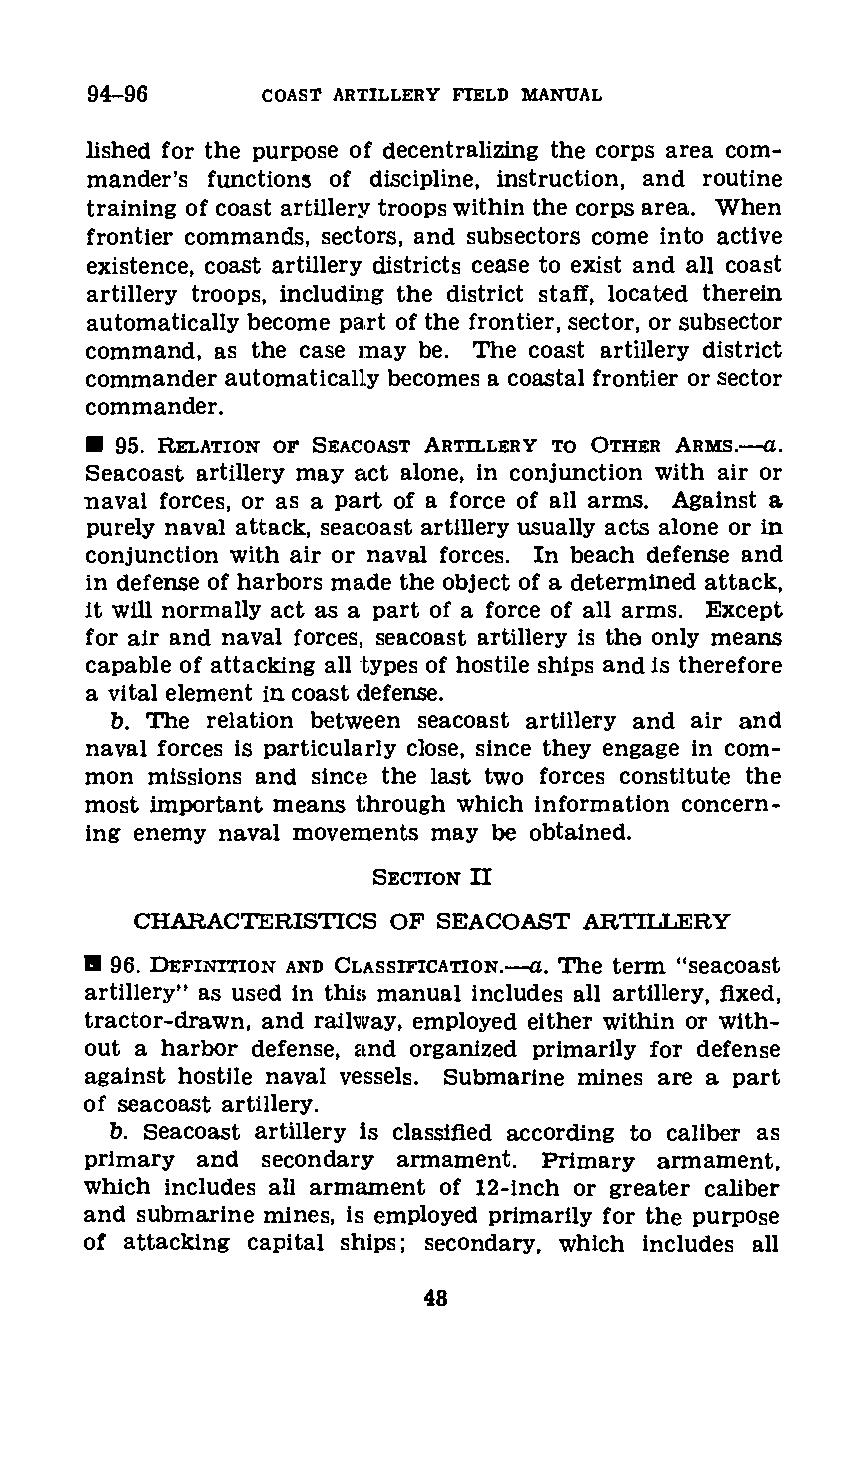 94-96 COAST ARTILLERY FIELD MANUAL lished for the purpose of decentralizing the corps area commander's functions of discipline, instruction, and routine training of coast artillery troops within the